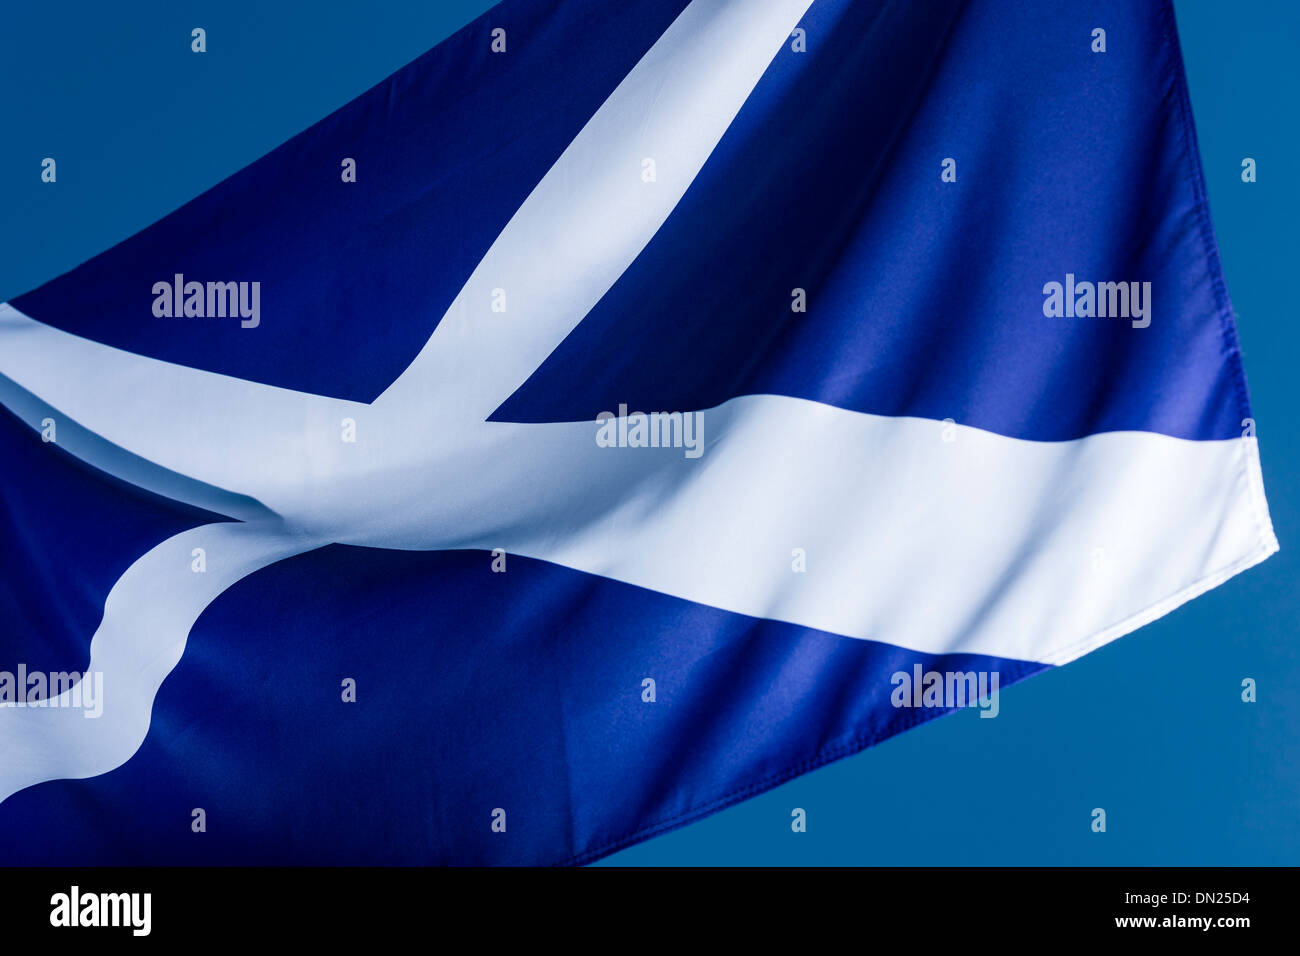 The Flag of Scotland, also known as the Cross of Saint Andrew, or Saltire. Stock Photo